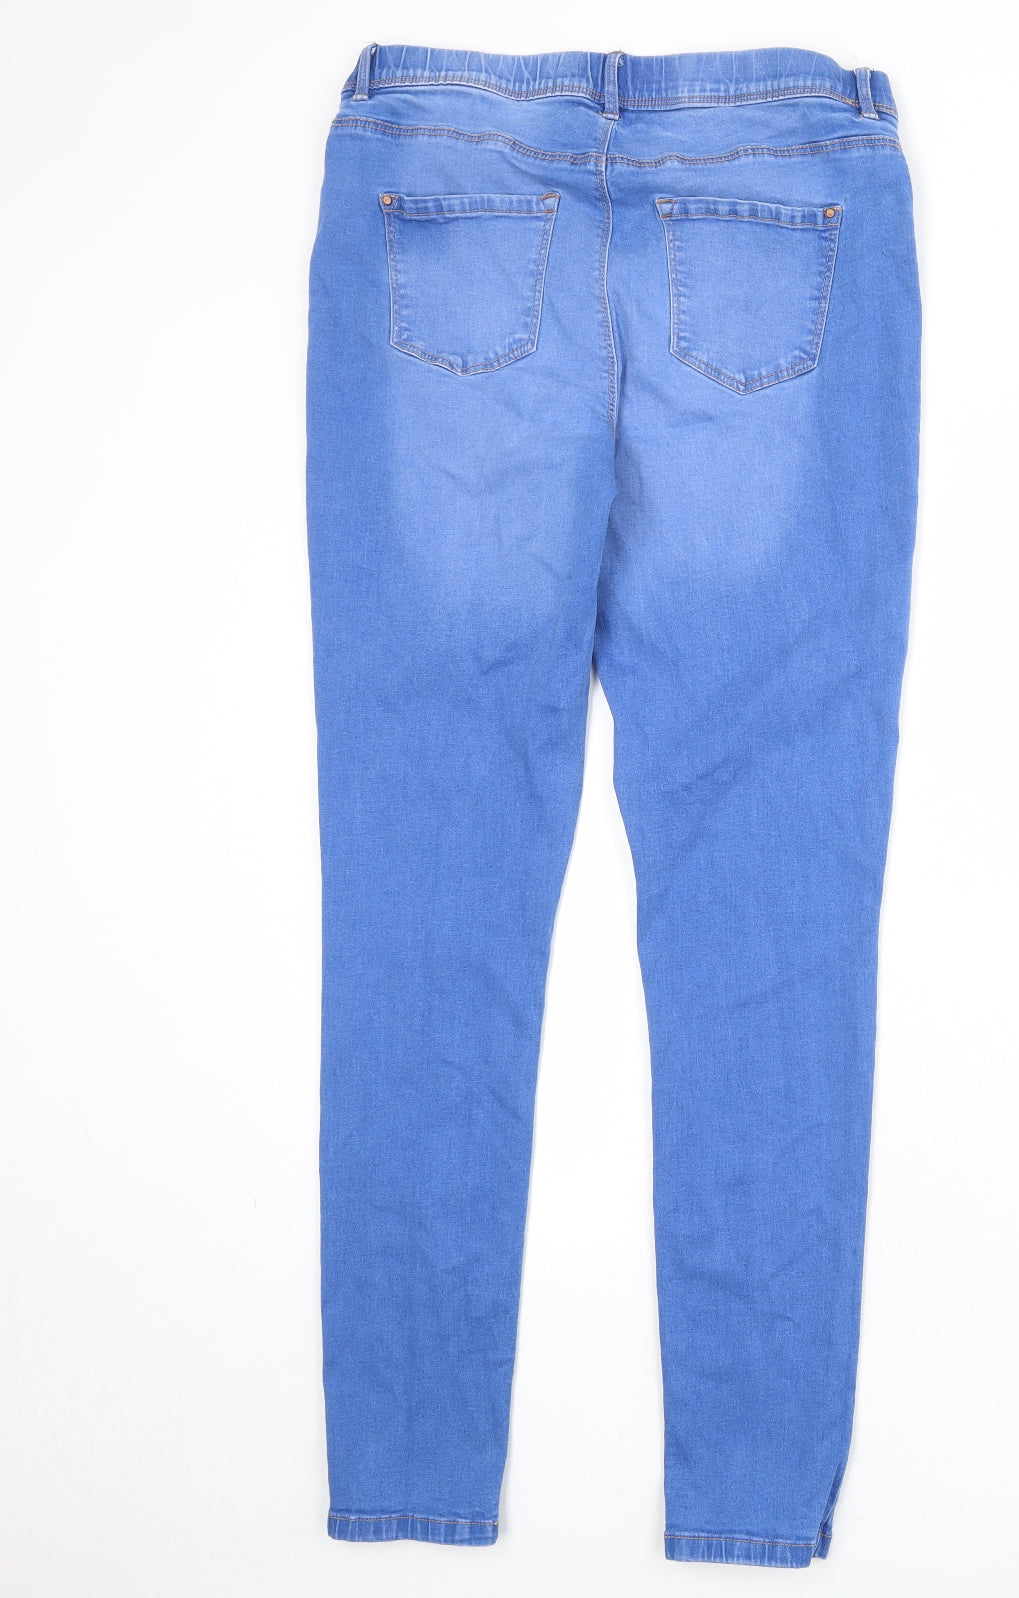 New Look Womens Blue Cotton Jegging Jeans Size 14 Regular